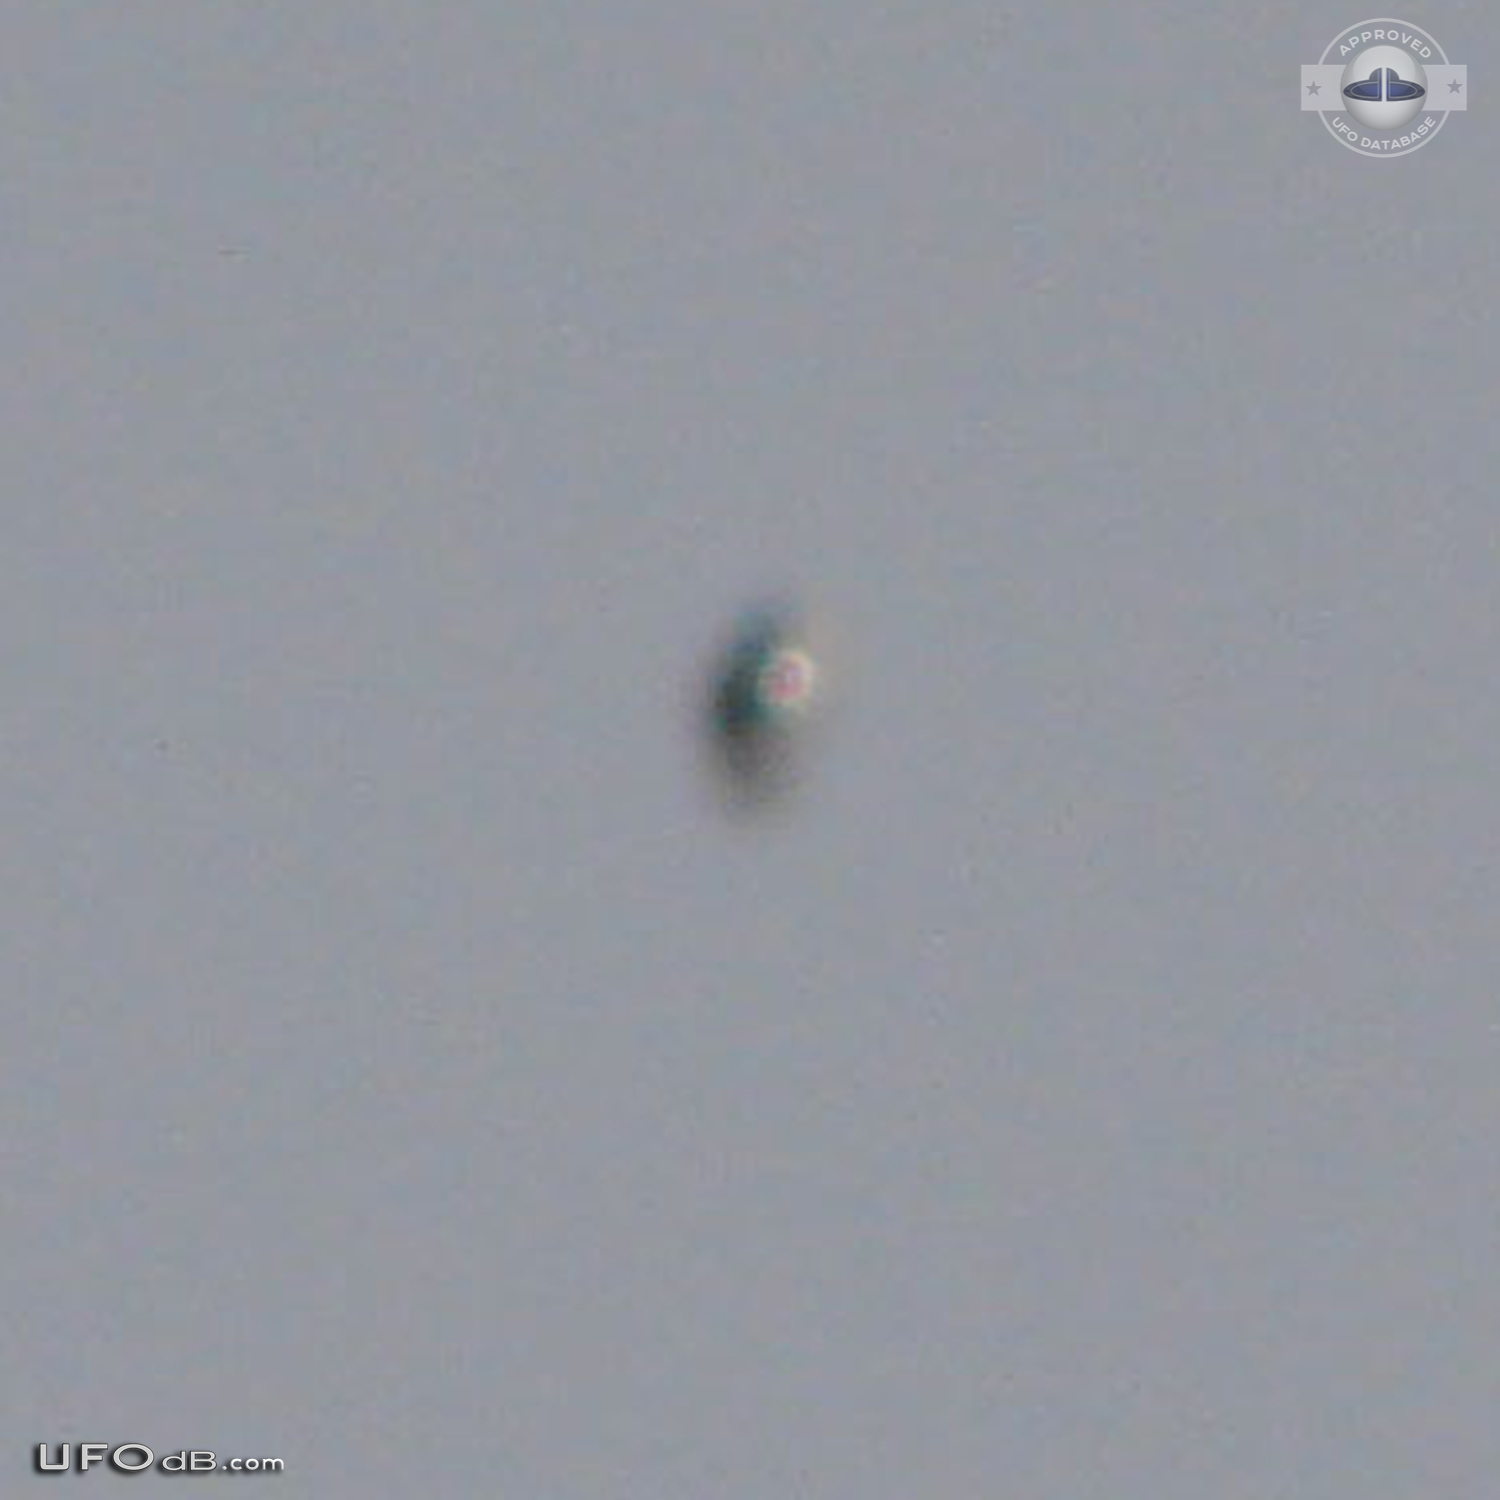 Shiny Upside-down Teardrop UFO rotating in the sky San Marcos CA USA UFO Picture #623-3